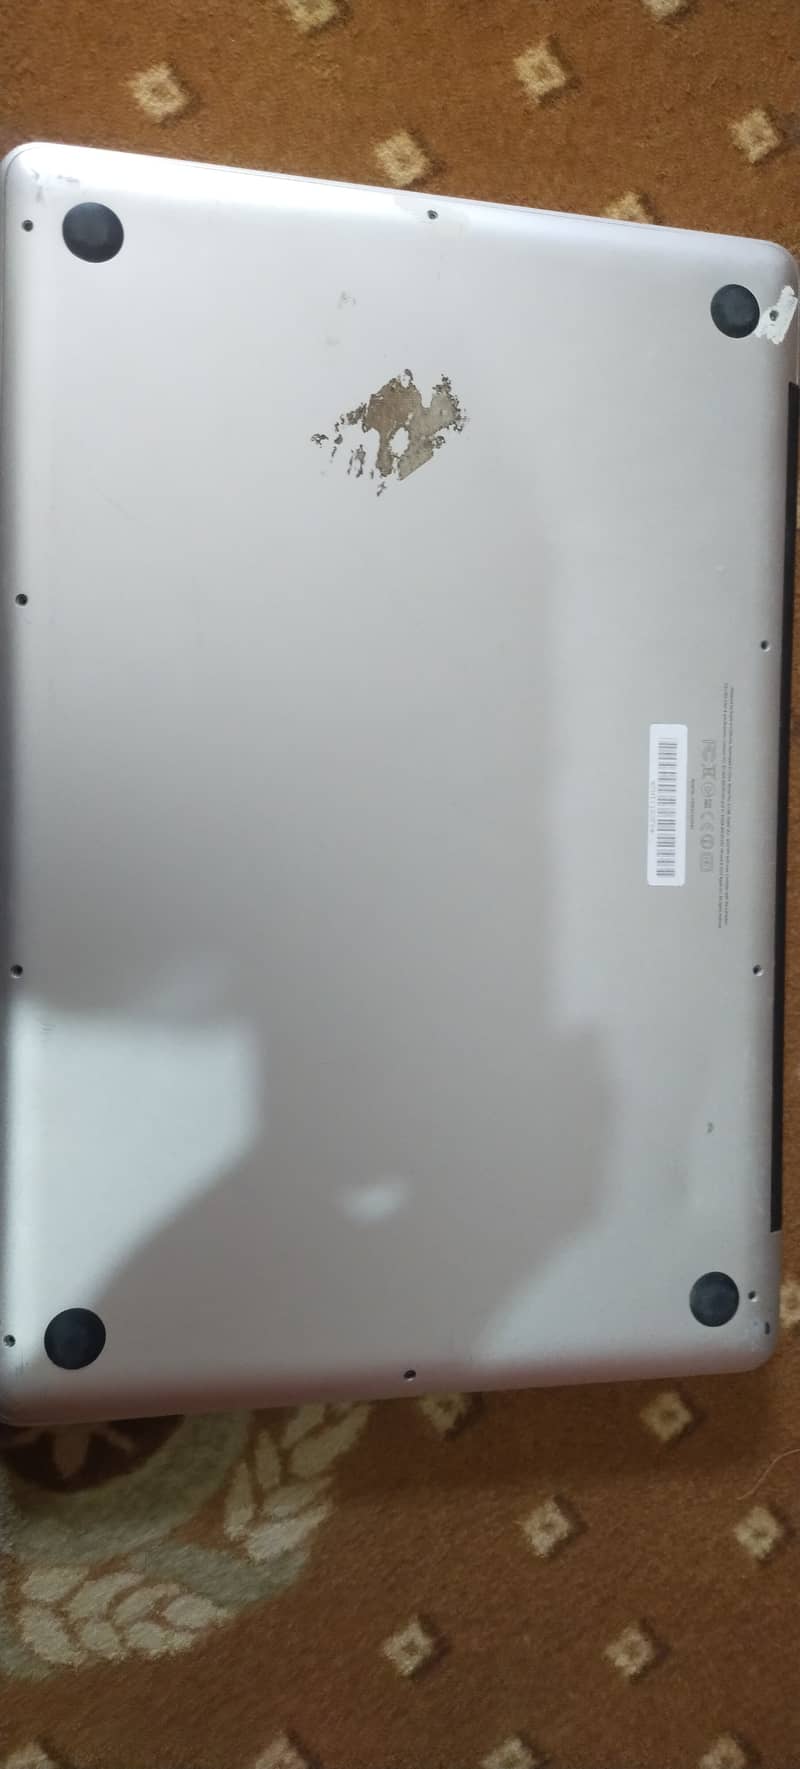 MacBook pro 2011 moled i7 very low price urgent for sale 1